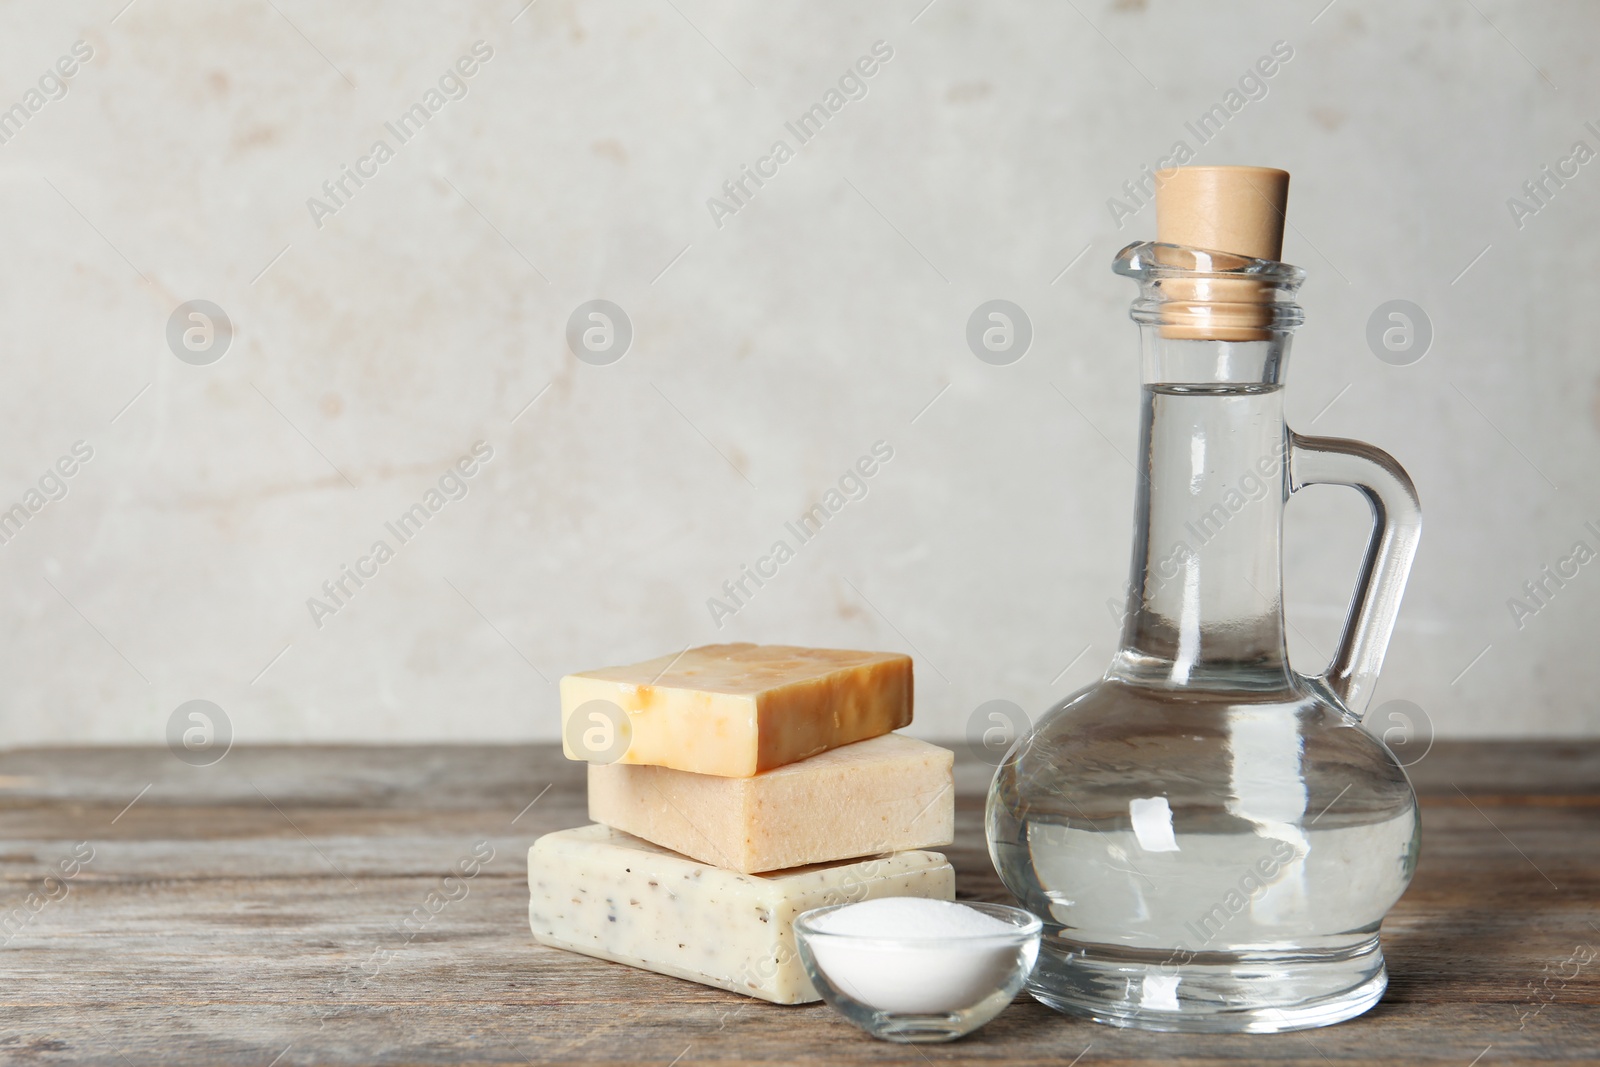 Photo of Composition with vinegar, baking soda and soap bars for cleaning on table. Space for text